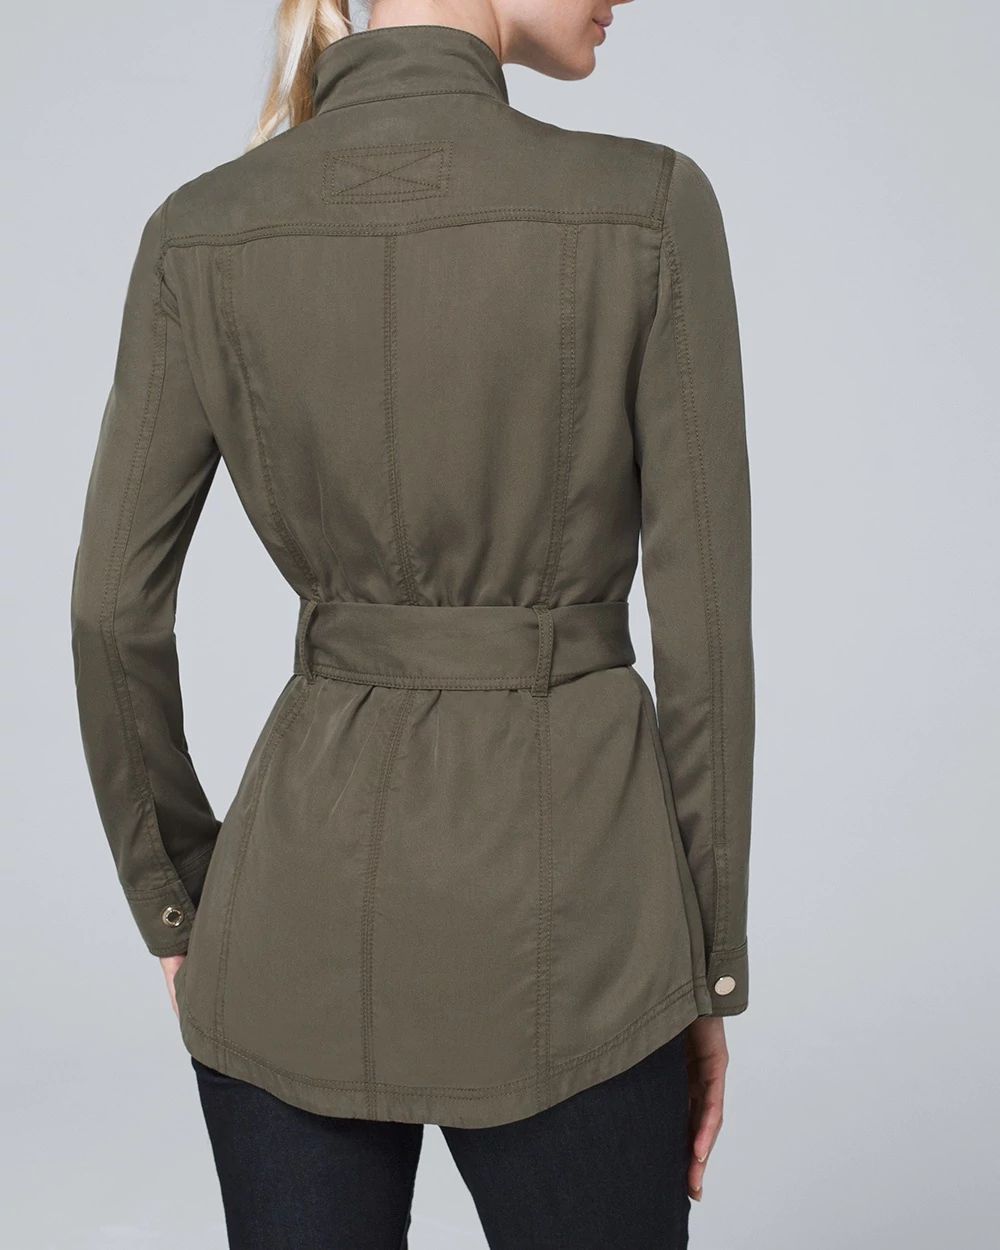 Petite Soft Utility Jacket with Removable Belt click to view larger image.